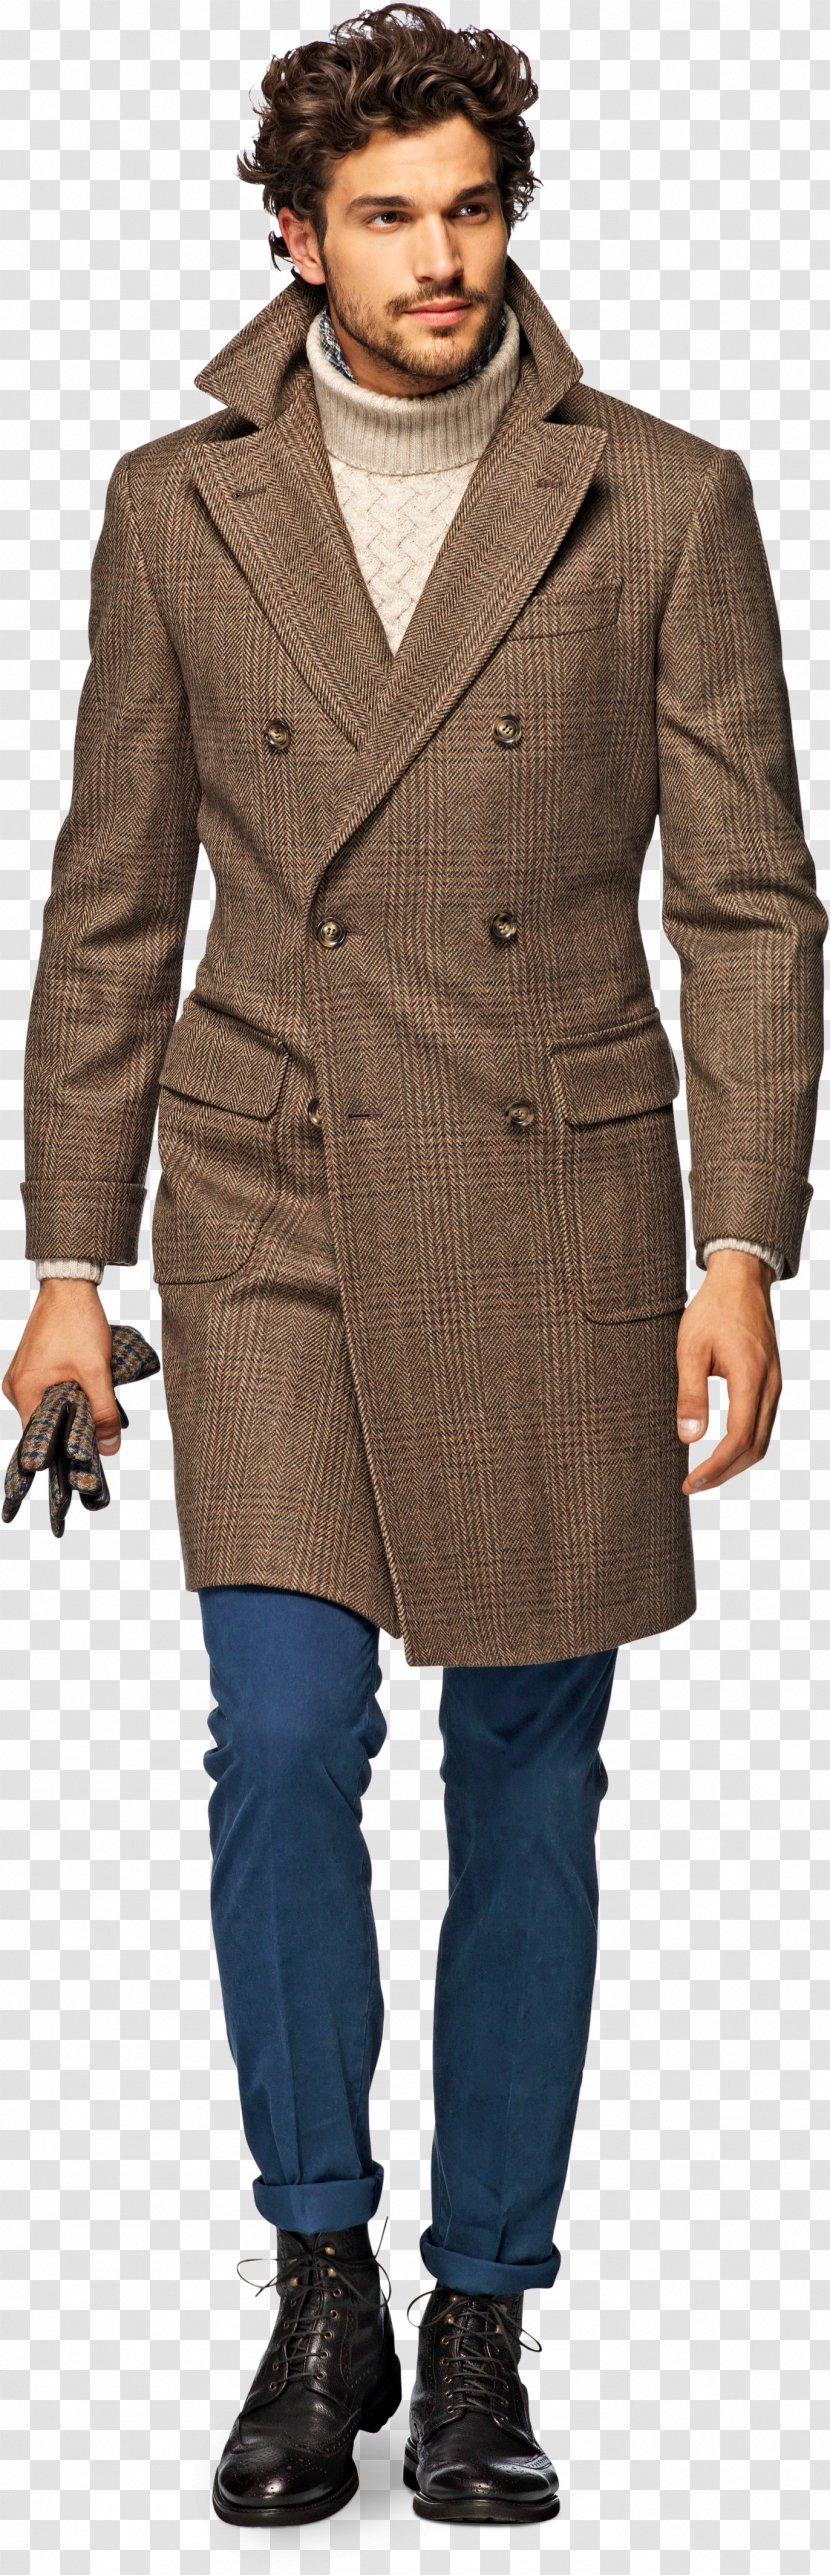 Overcoat Jacket Clothing Suitsupply - Collar - Double Breasted Transparent PNG